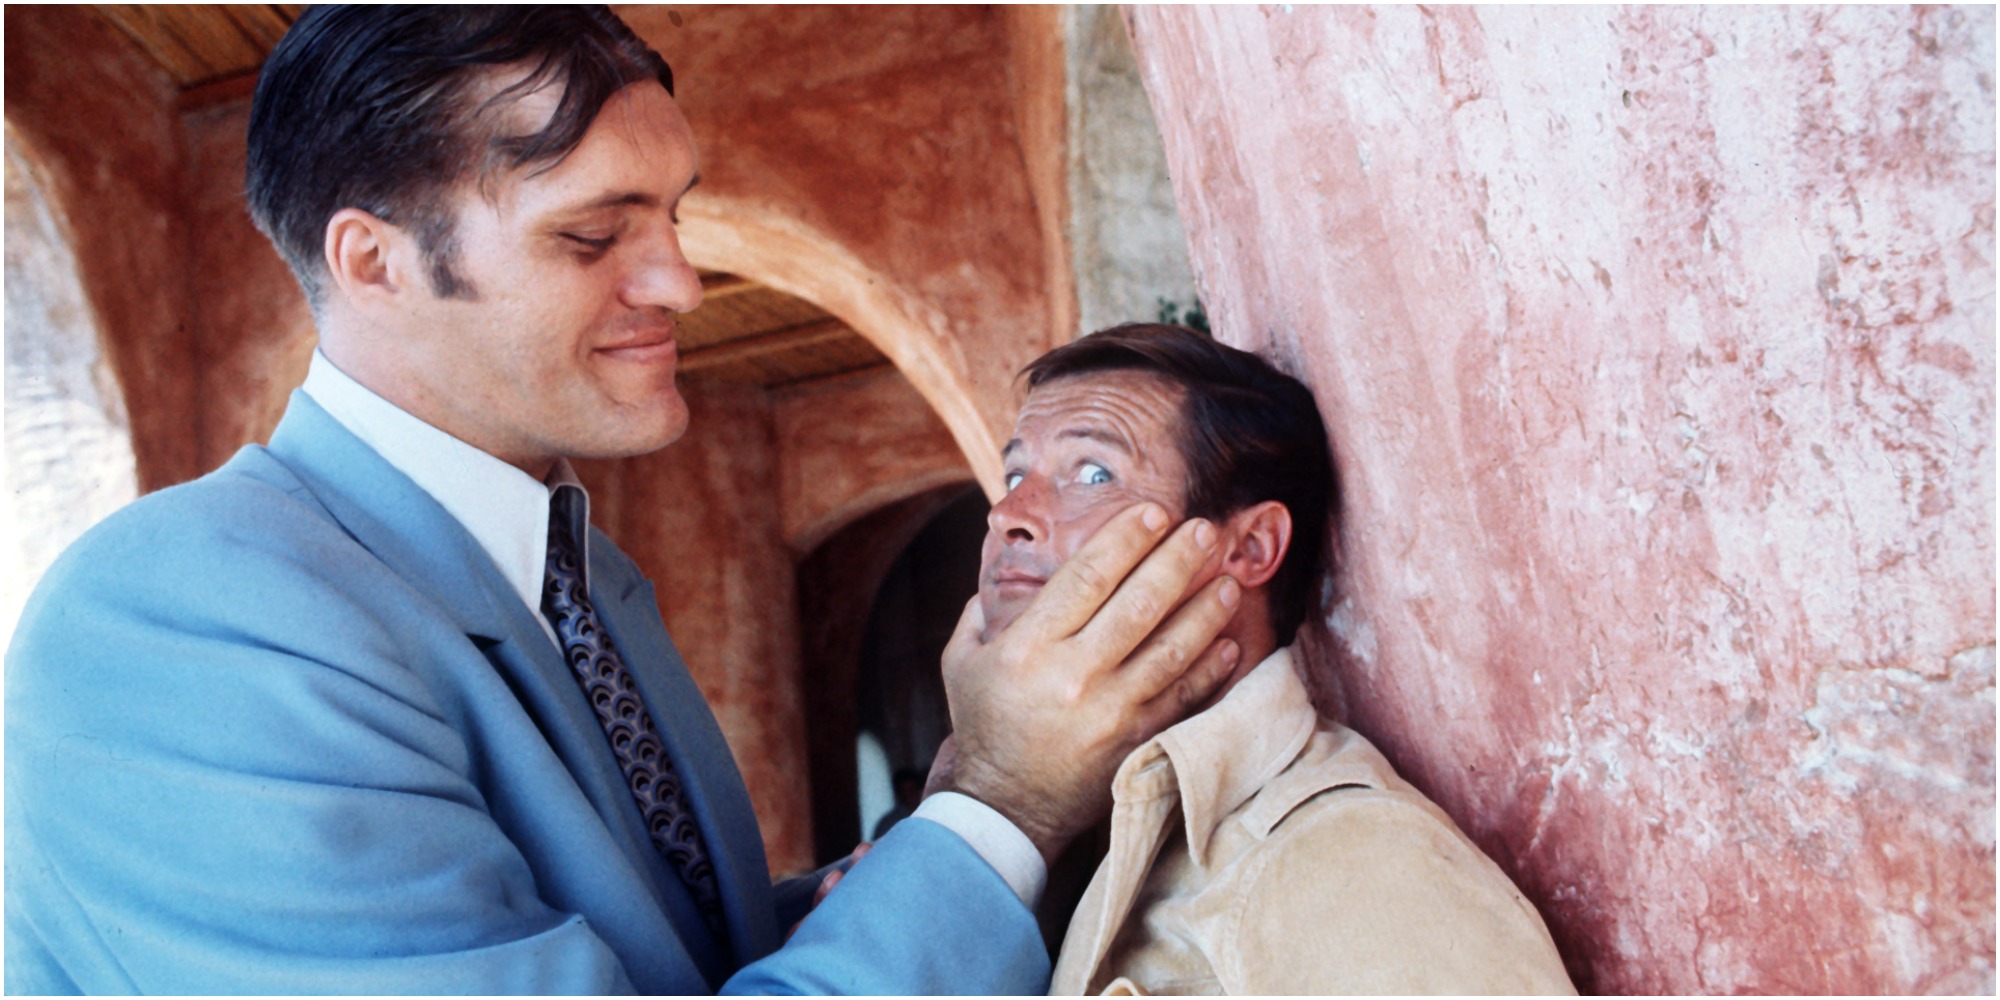 Richard Keil and Roger Moore in The Spy Who Loved Me.